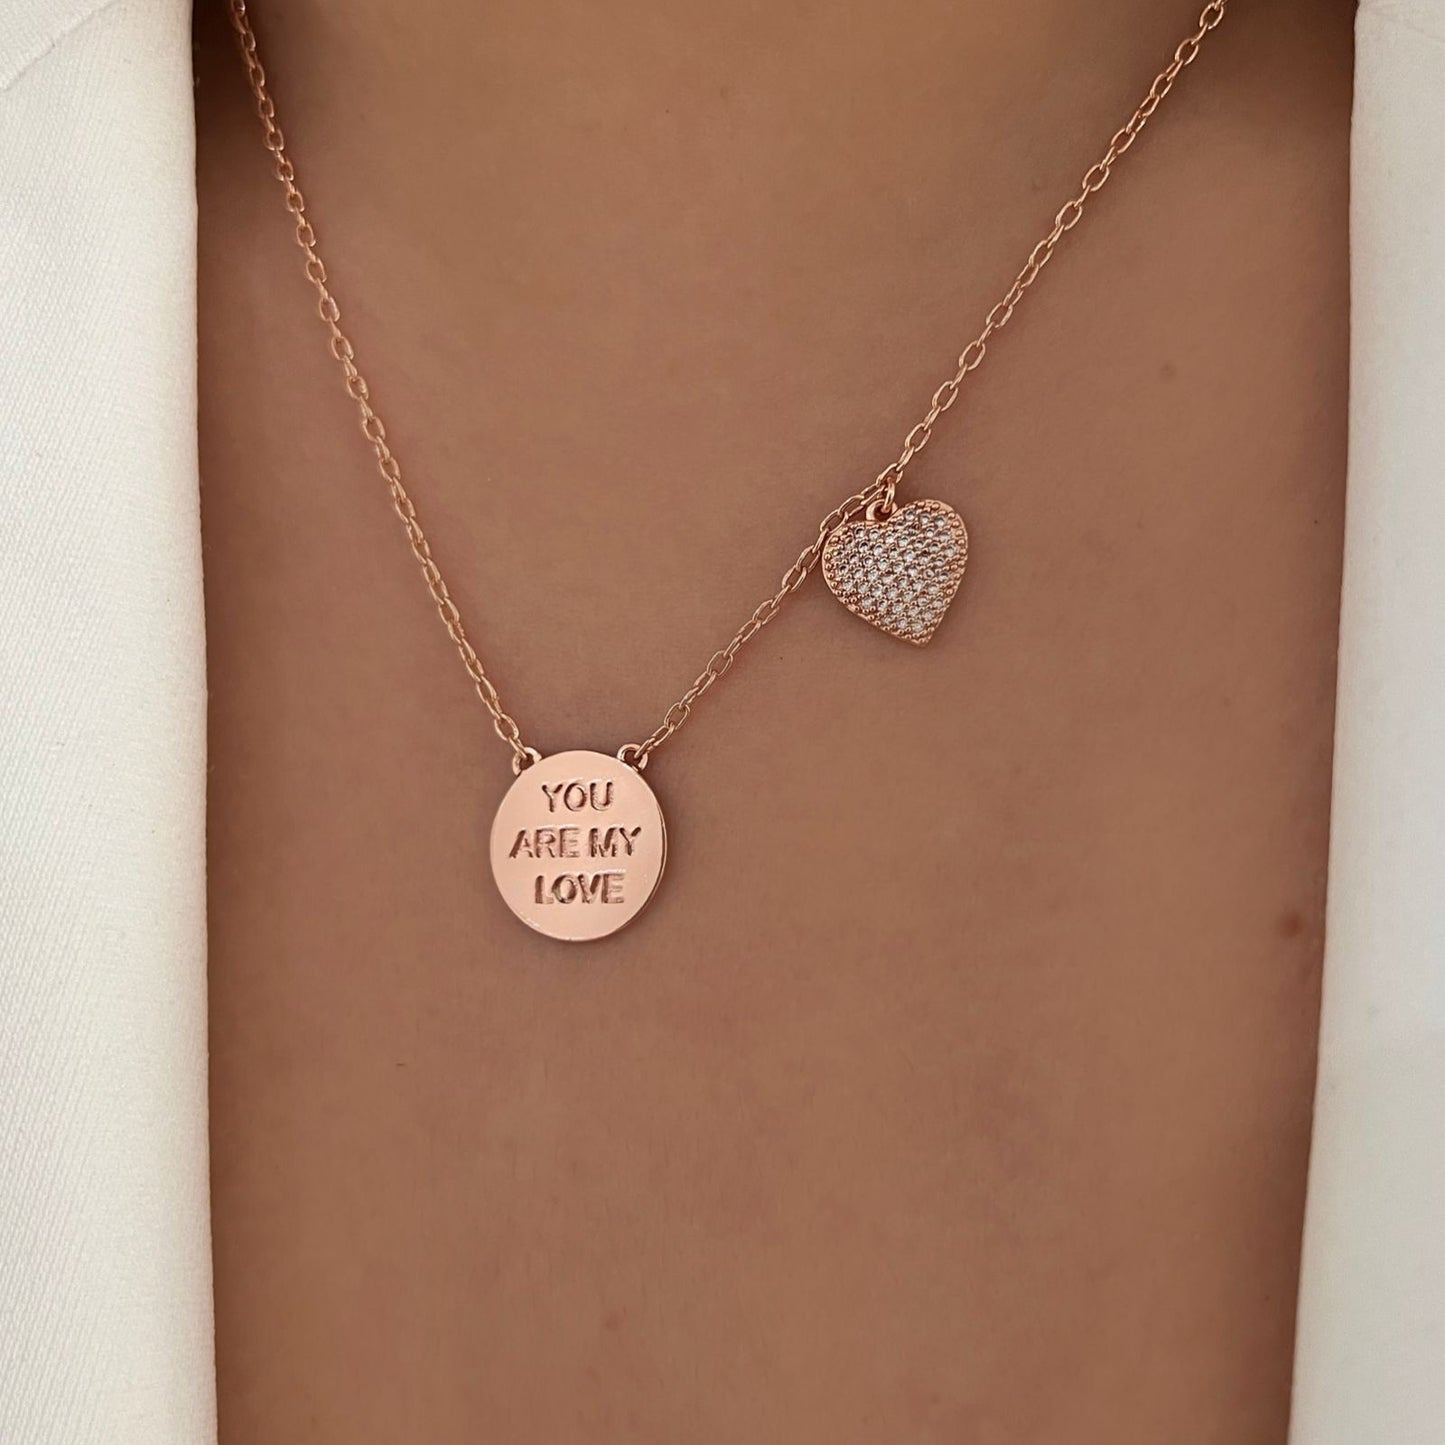 You are my love necklace (965)